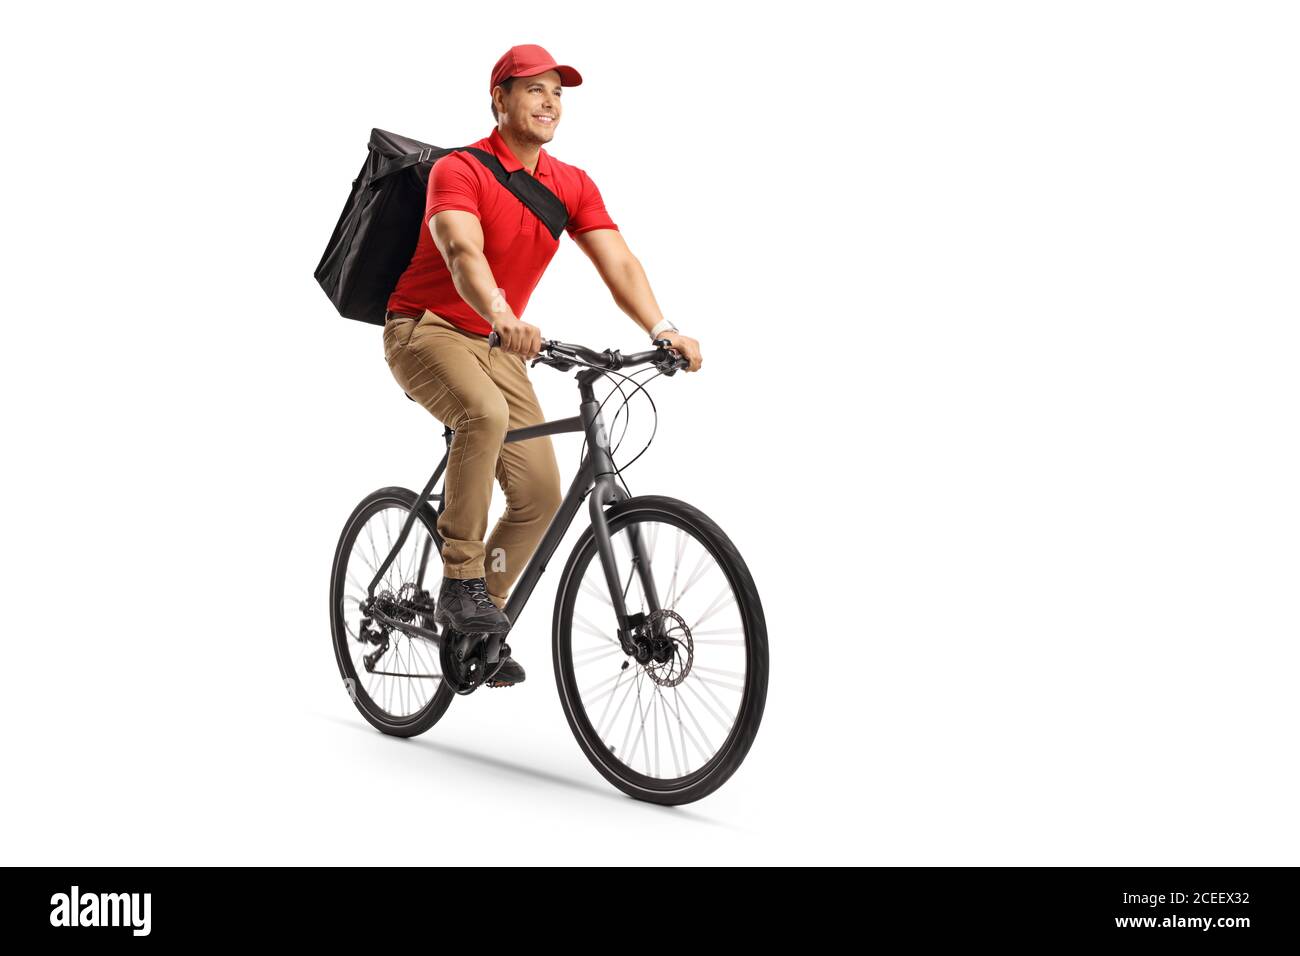 Food delivery guy riding a bicycle isolated on white background Stock Photo